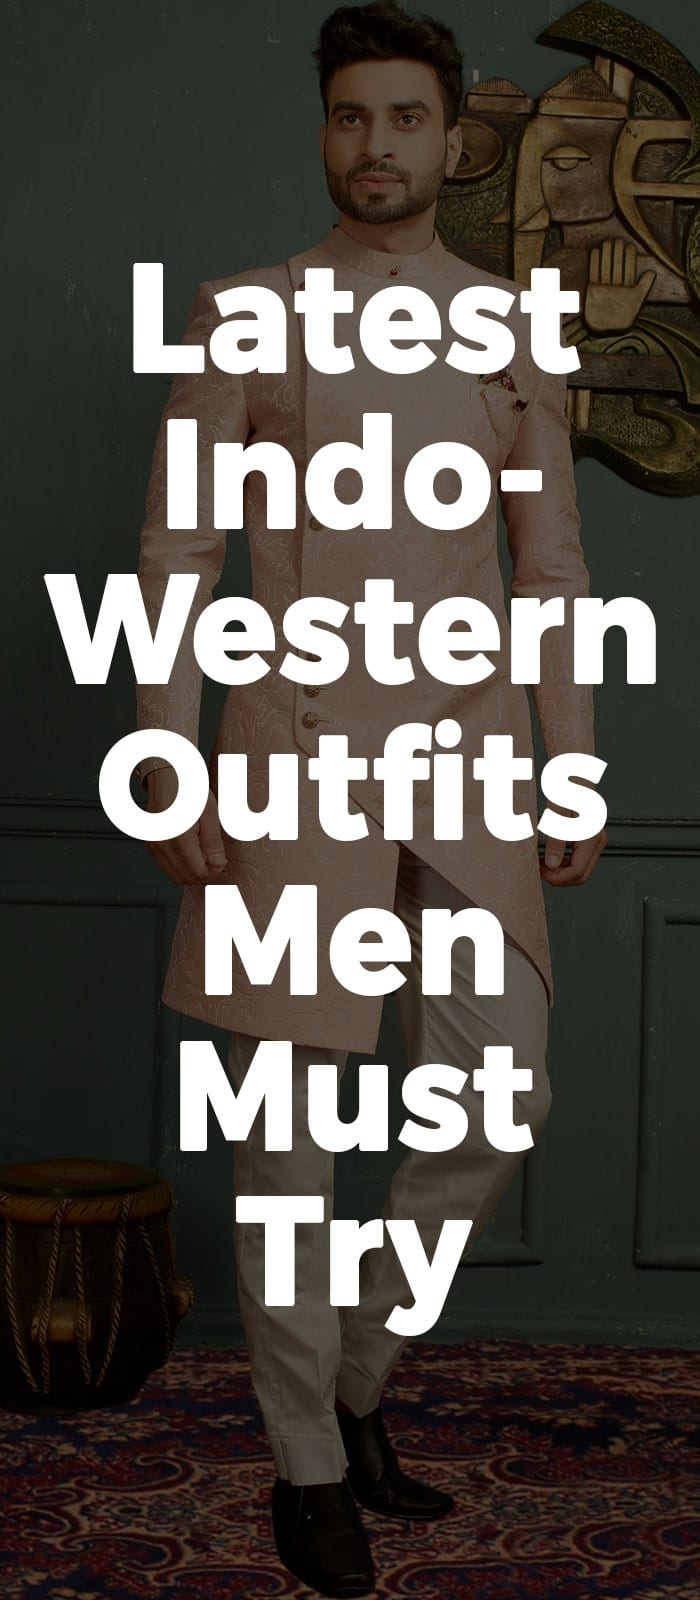 Latest Indo- Western Outfits Men Must Try